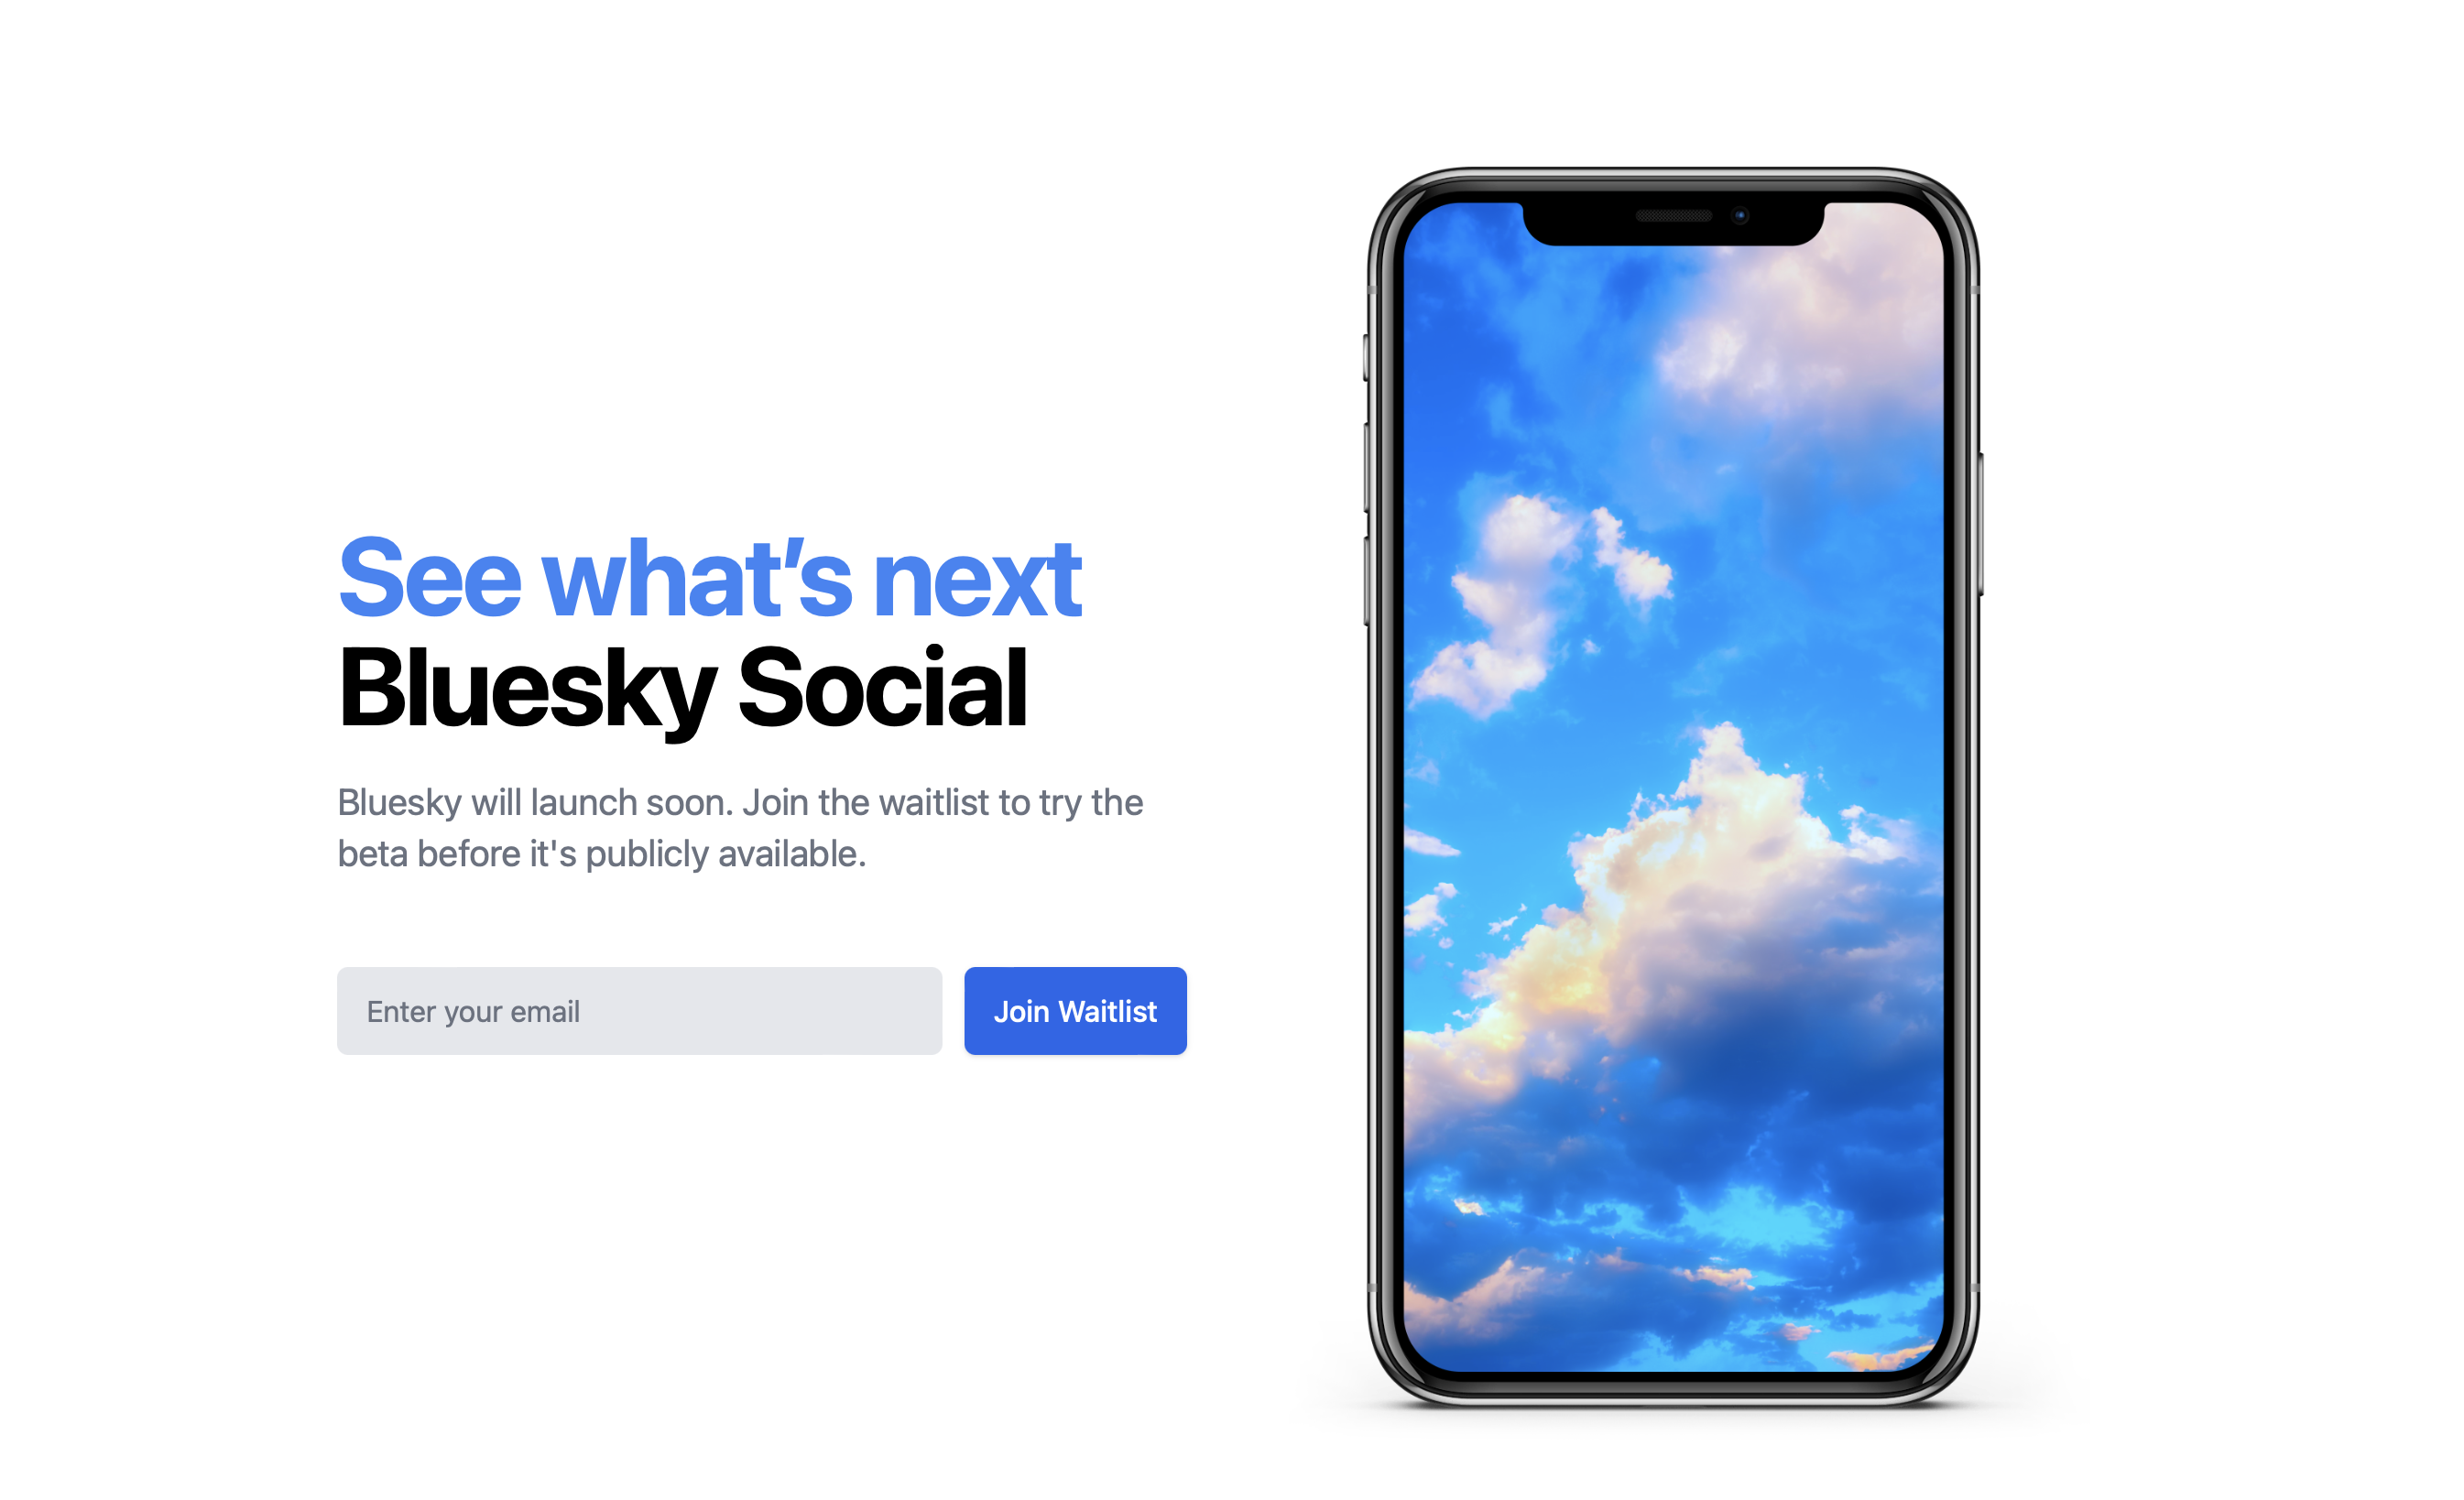 What’s the buzz around Bluesky Social?